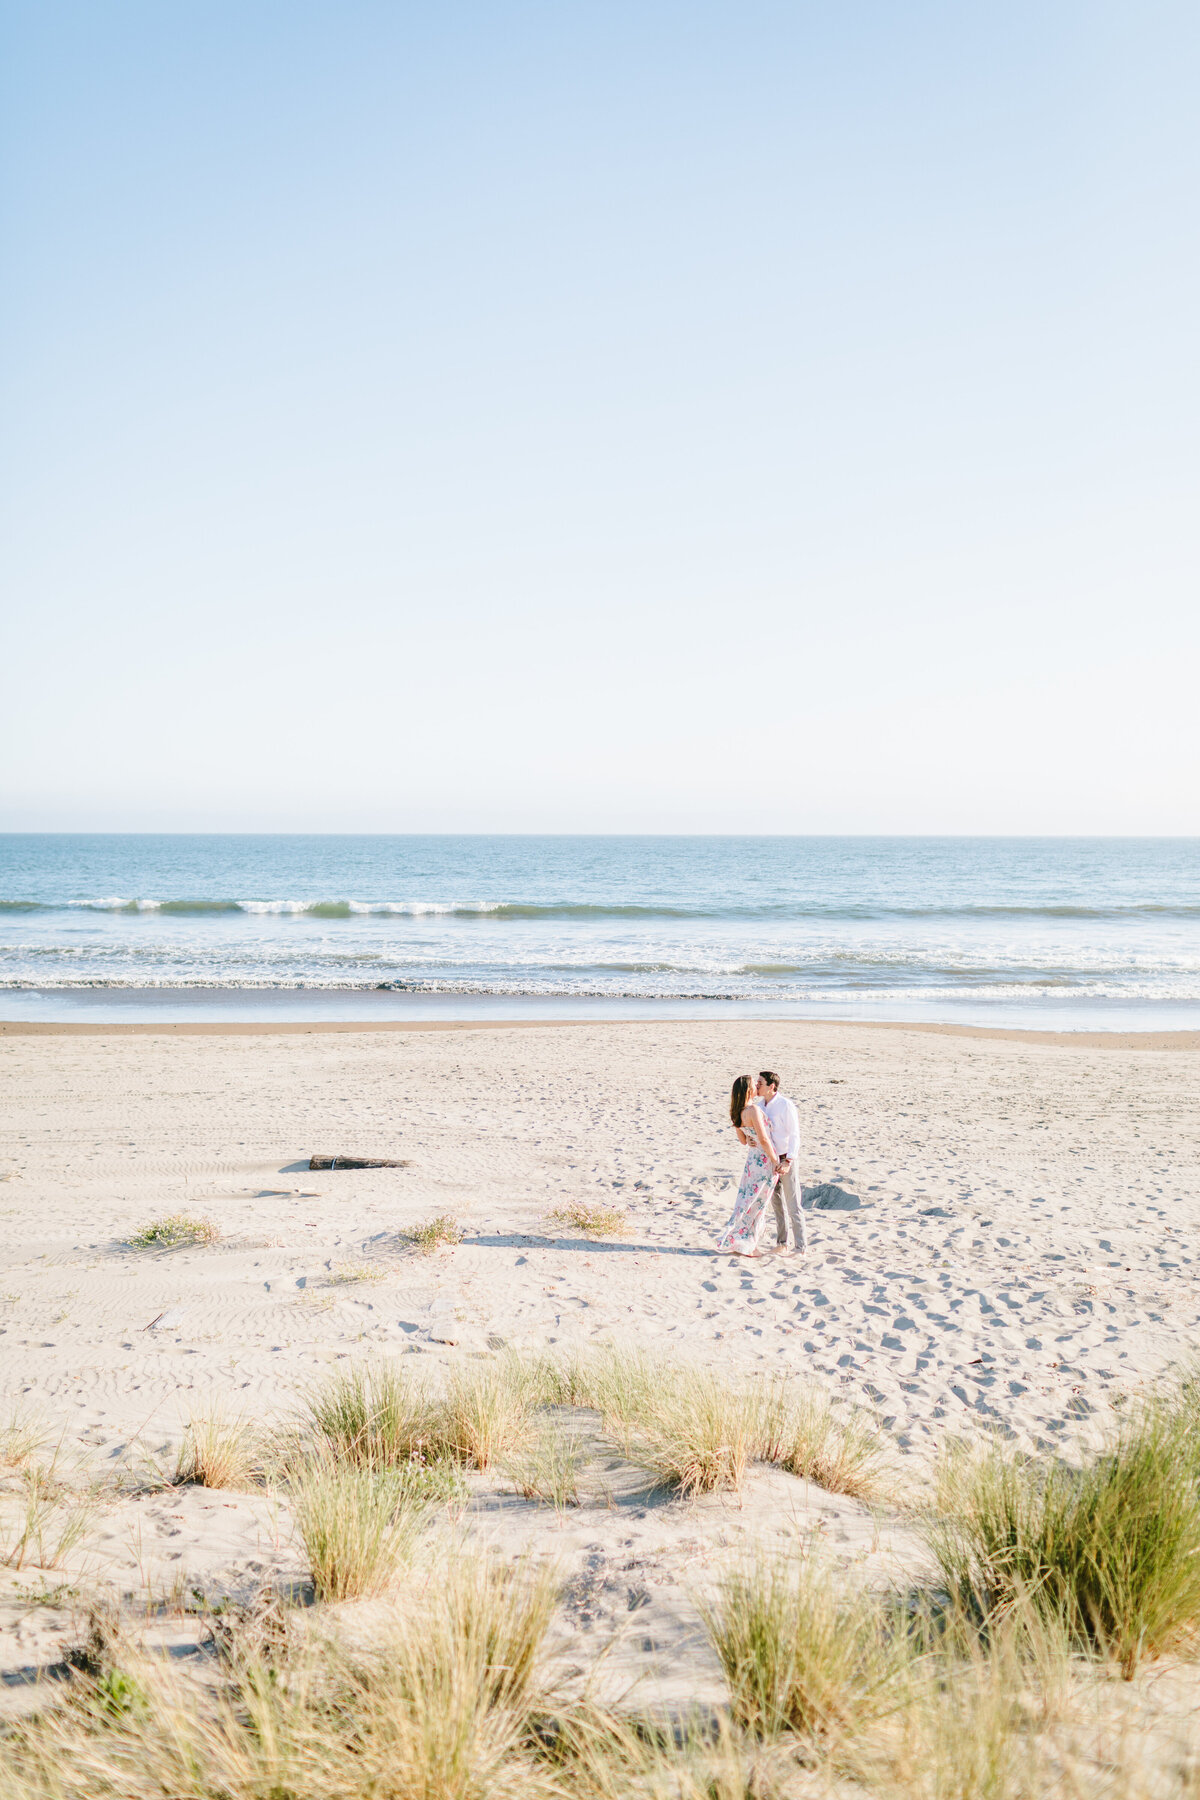 Best California and Texas Engagement Photographer-Jodee Debes Photography-118